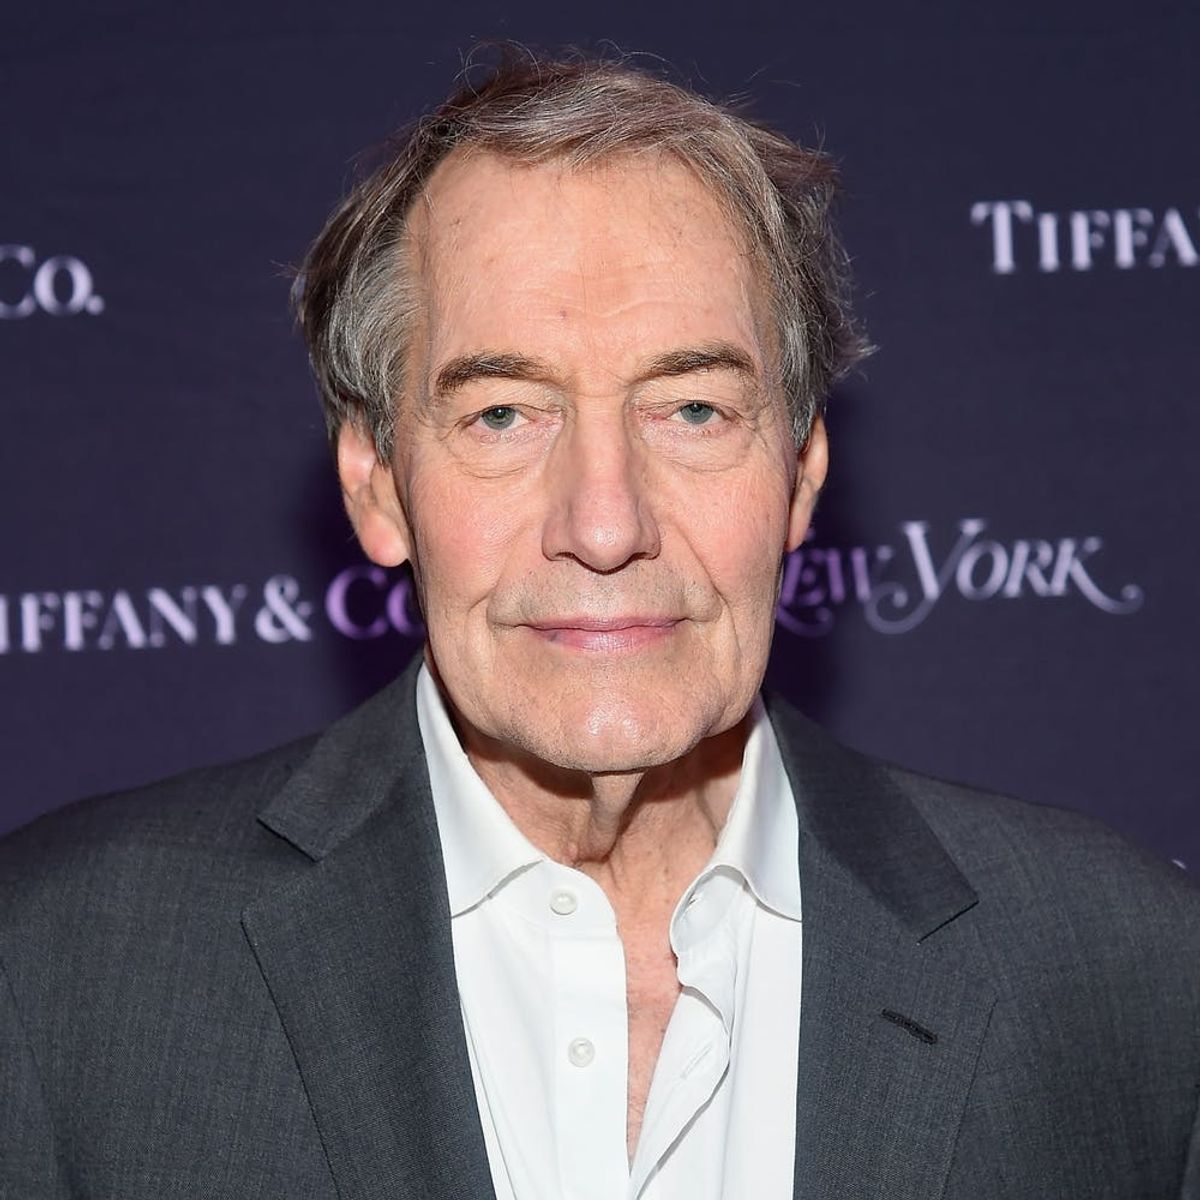 Charlie Rose Fired by CBS After Eight Women Accuse Him of Sexual Harassment